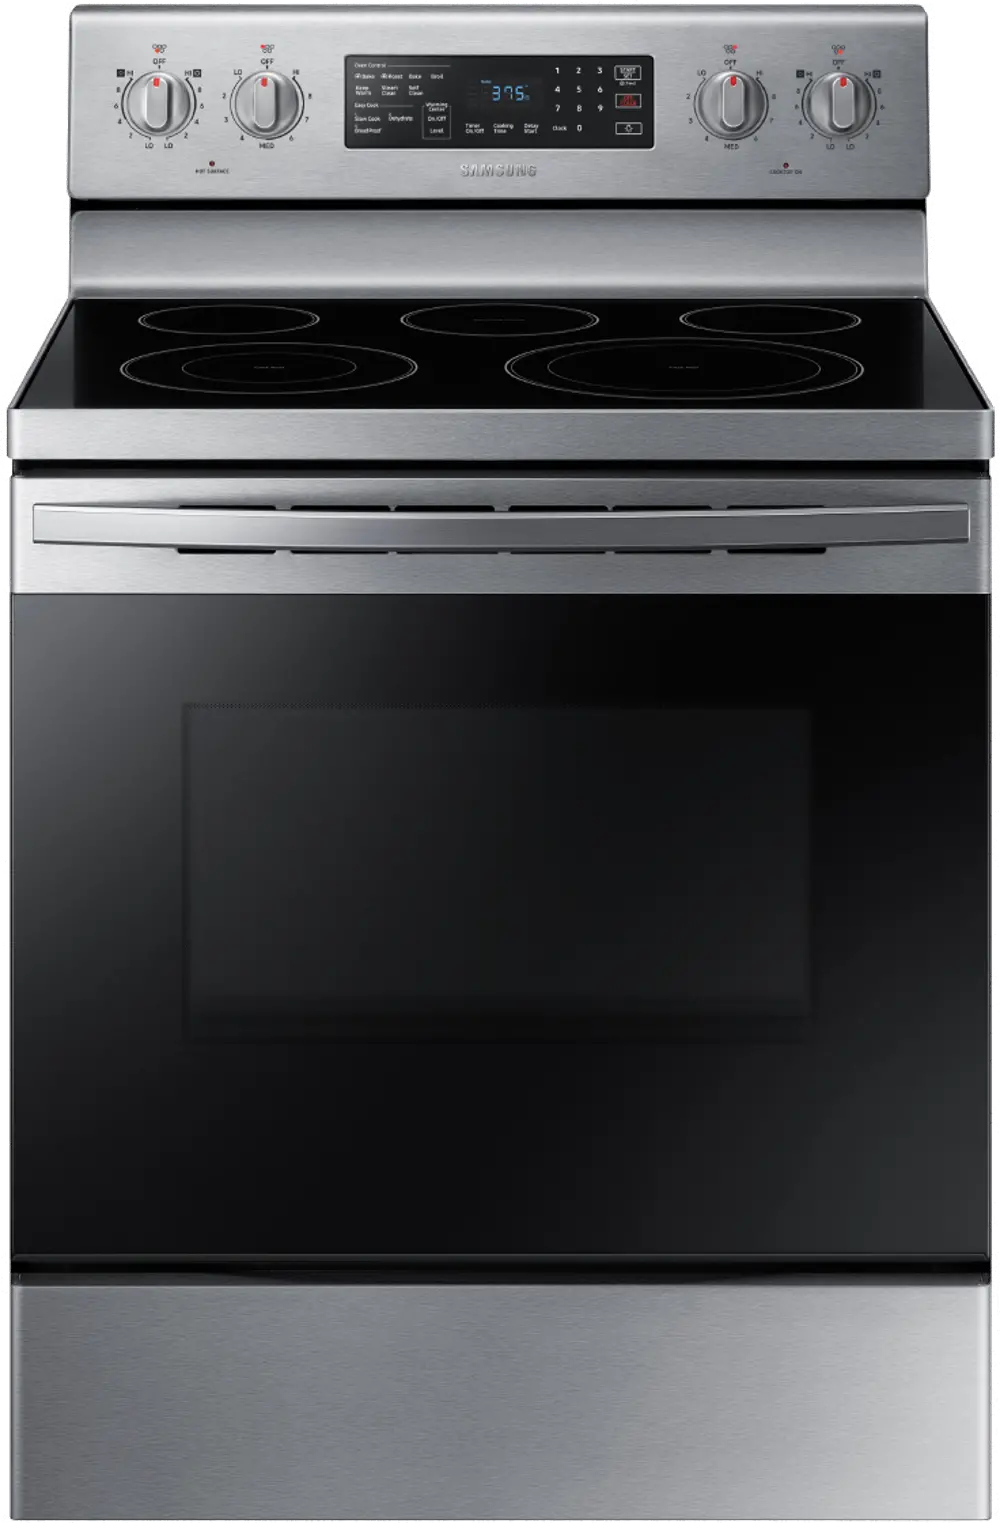 NE59T4311SS Samsung 30 Inch Electric Range - 5.9 cu. ft. Stainless Steel-1